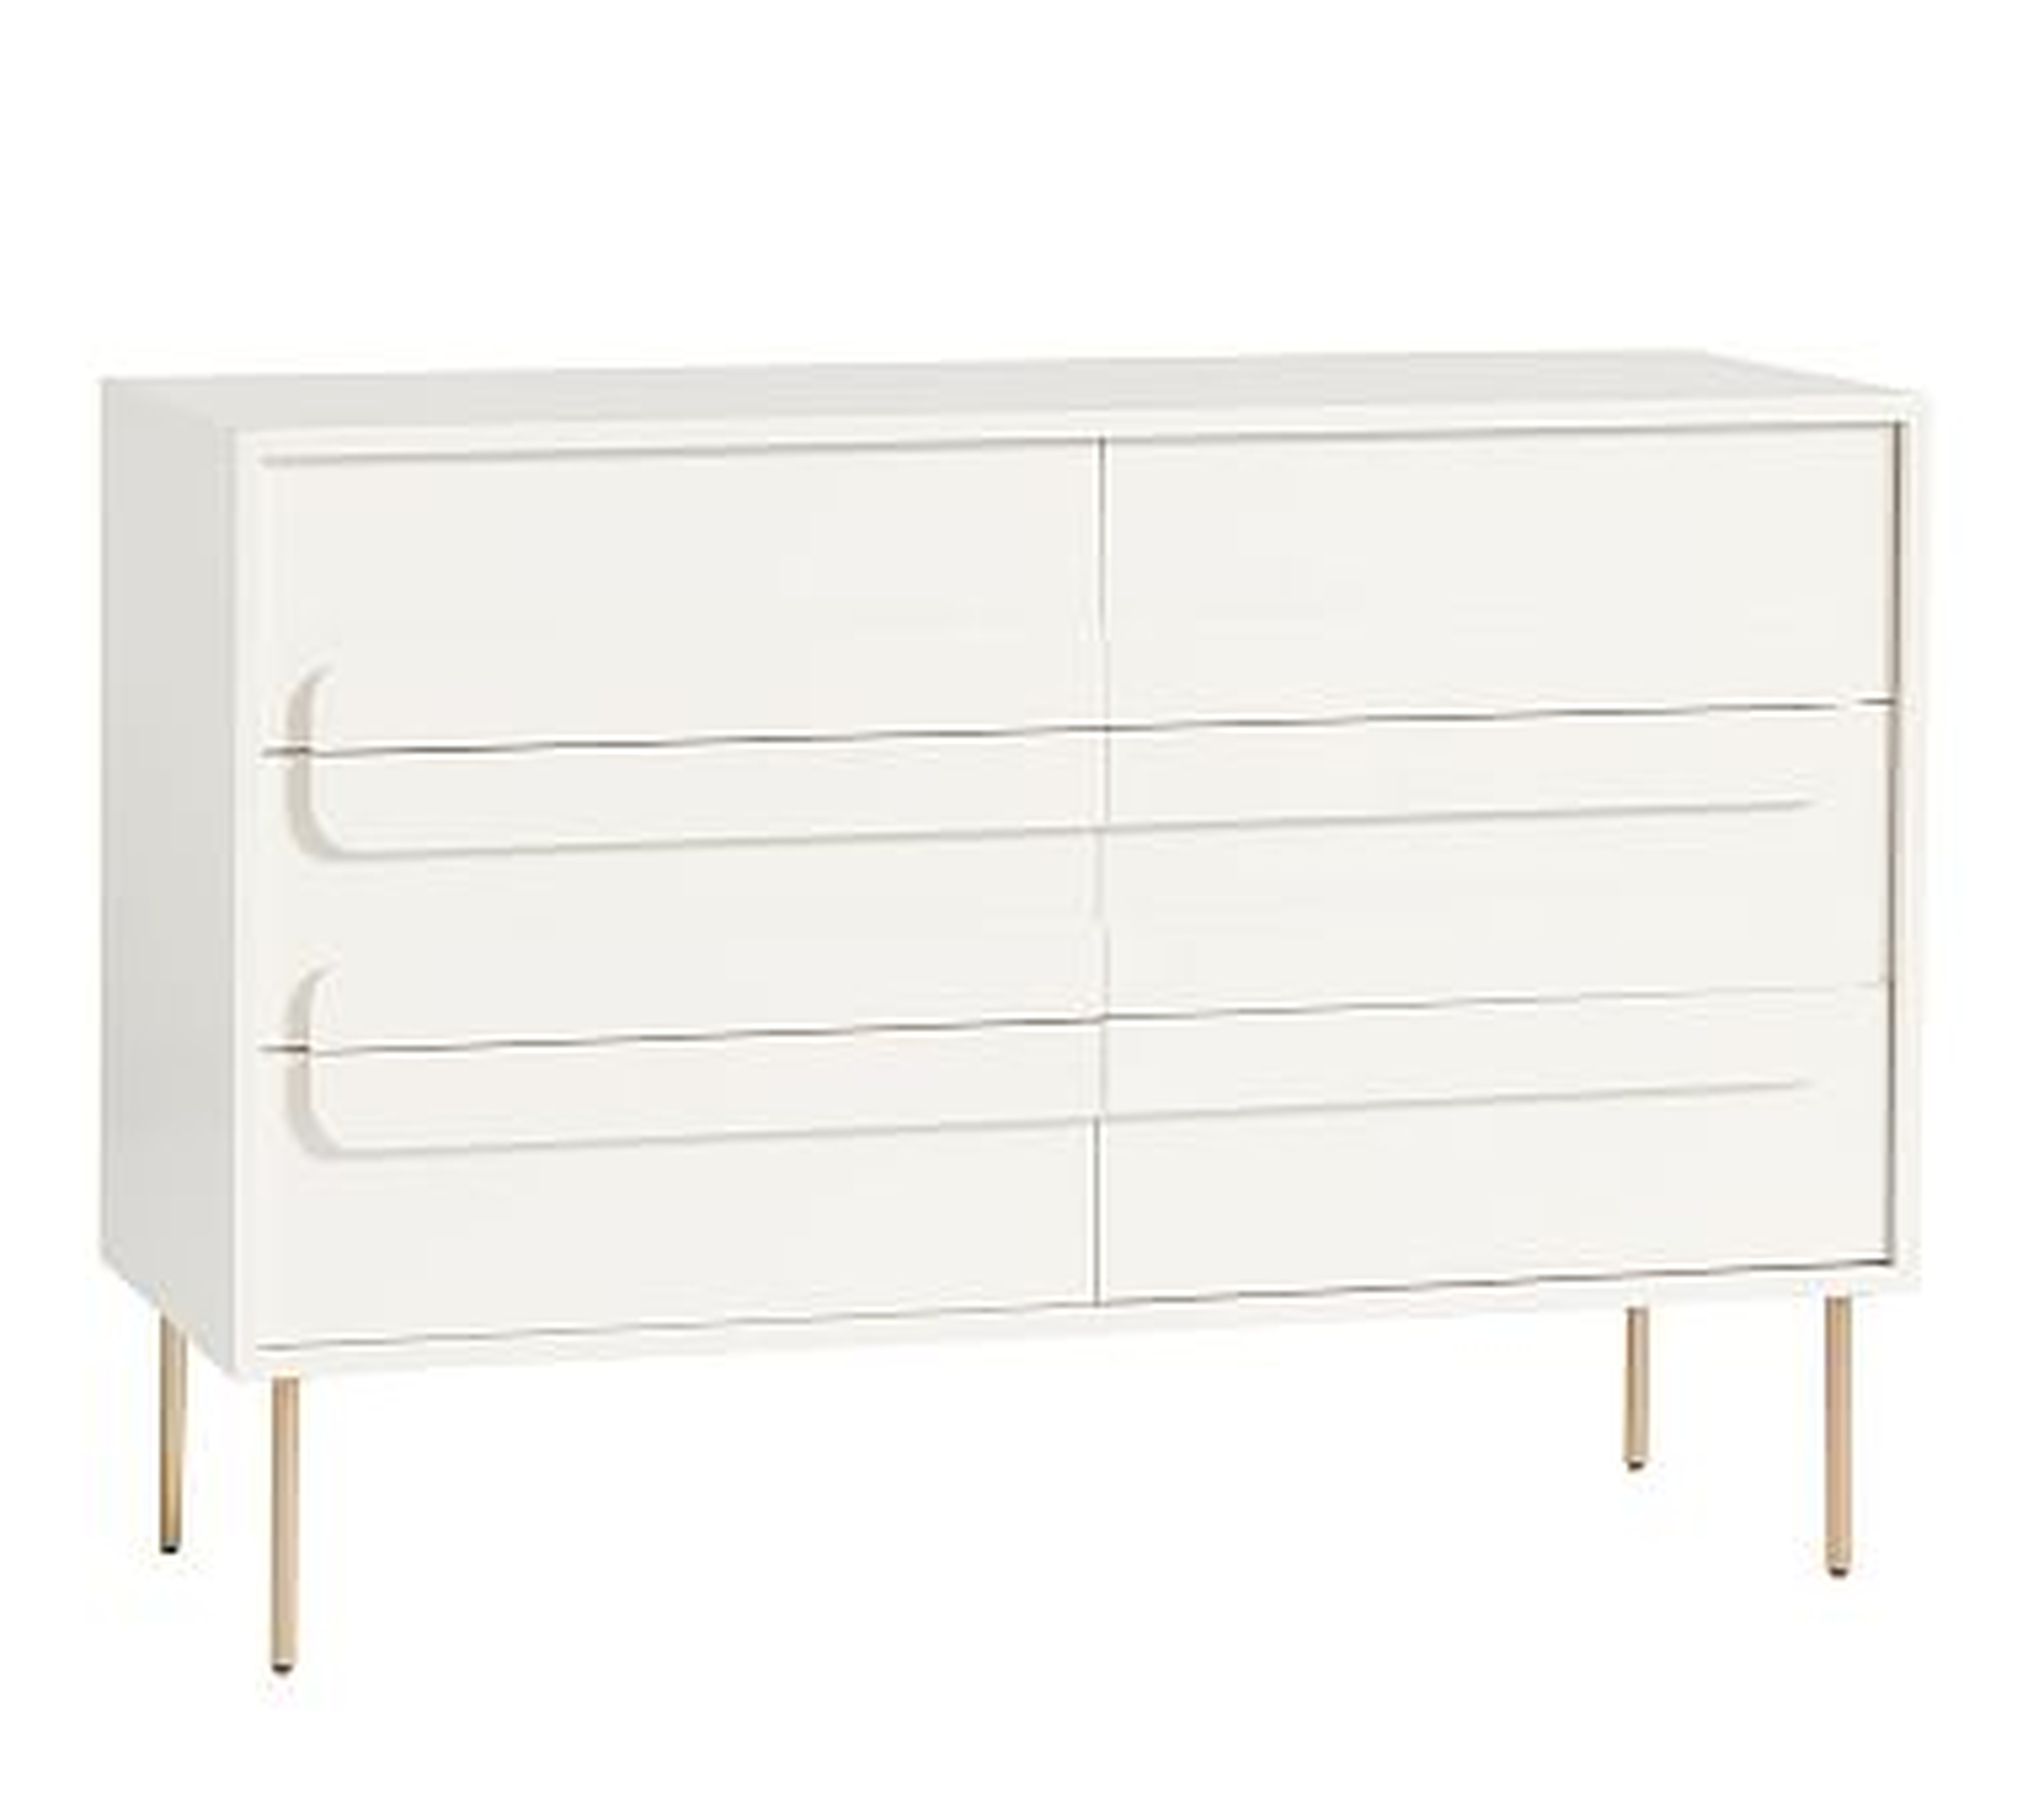 west elm x pbk Gemini 6-Drawer Dresser Only, White Lacquer, Flat Rate - Pottery Barn Kids